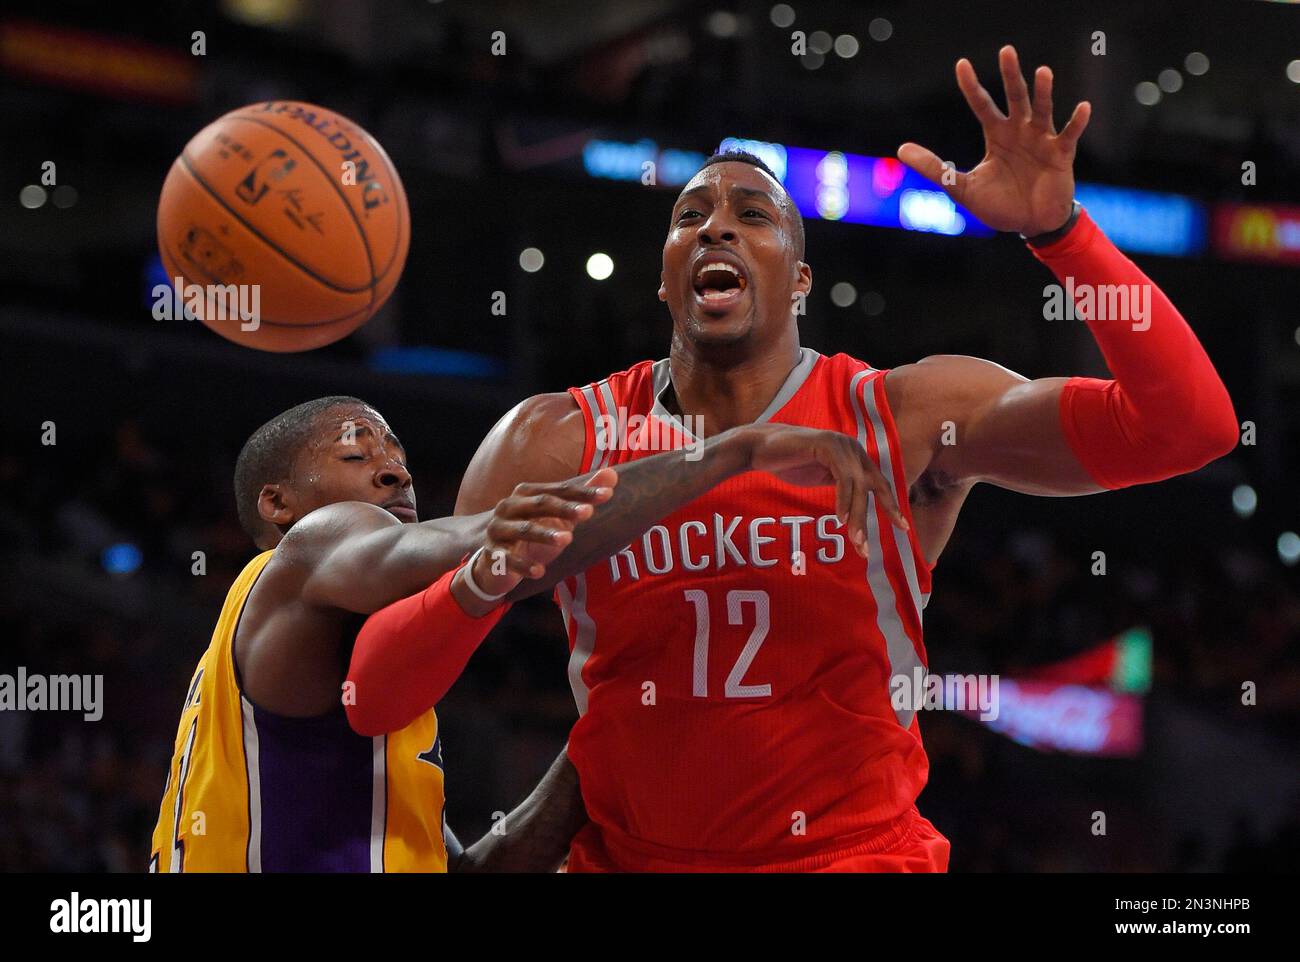 Los Angeles Lakers forward Ed Davis, left, fouls Houston Rockets center Dwight Howard during the second half of an NBA basketball game, Tuesday, Oct. 28, 2014, in Los Angeles. The Rockets won 108-90. (AP Photo/Mark J. Terrill) Stock Photo